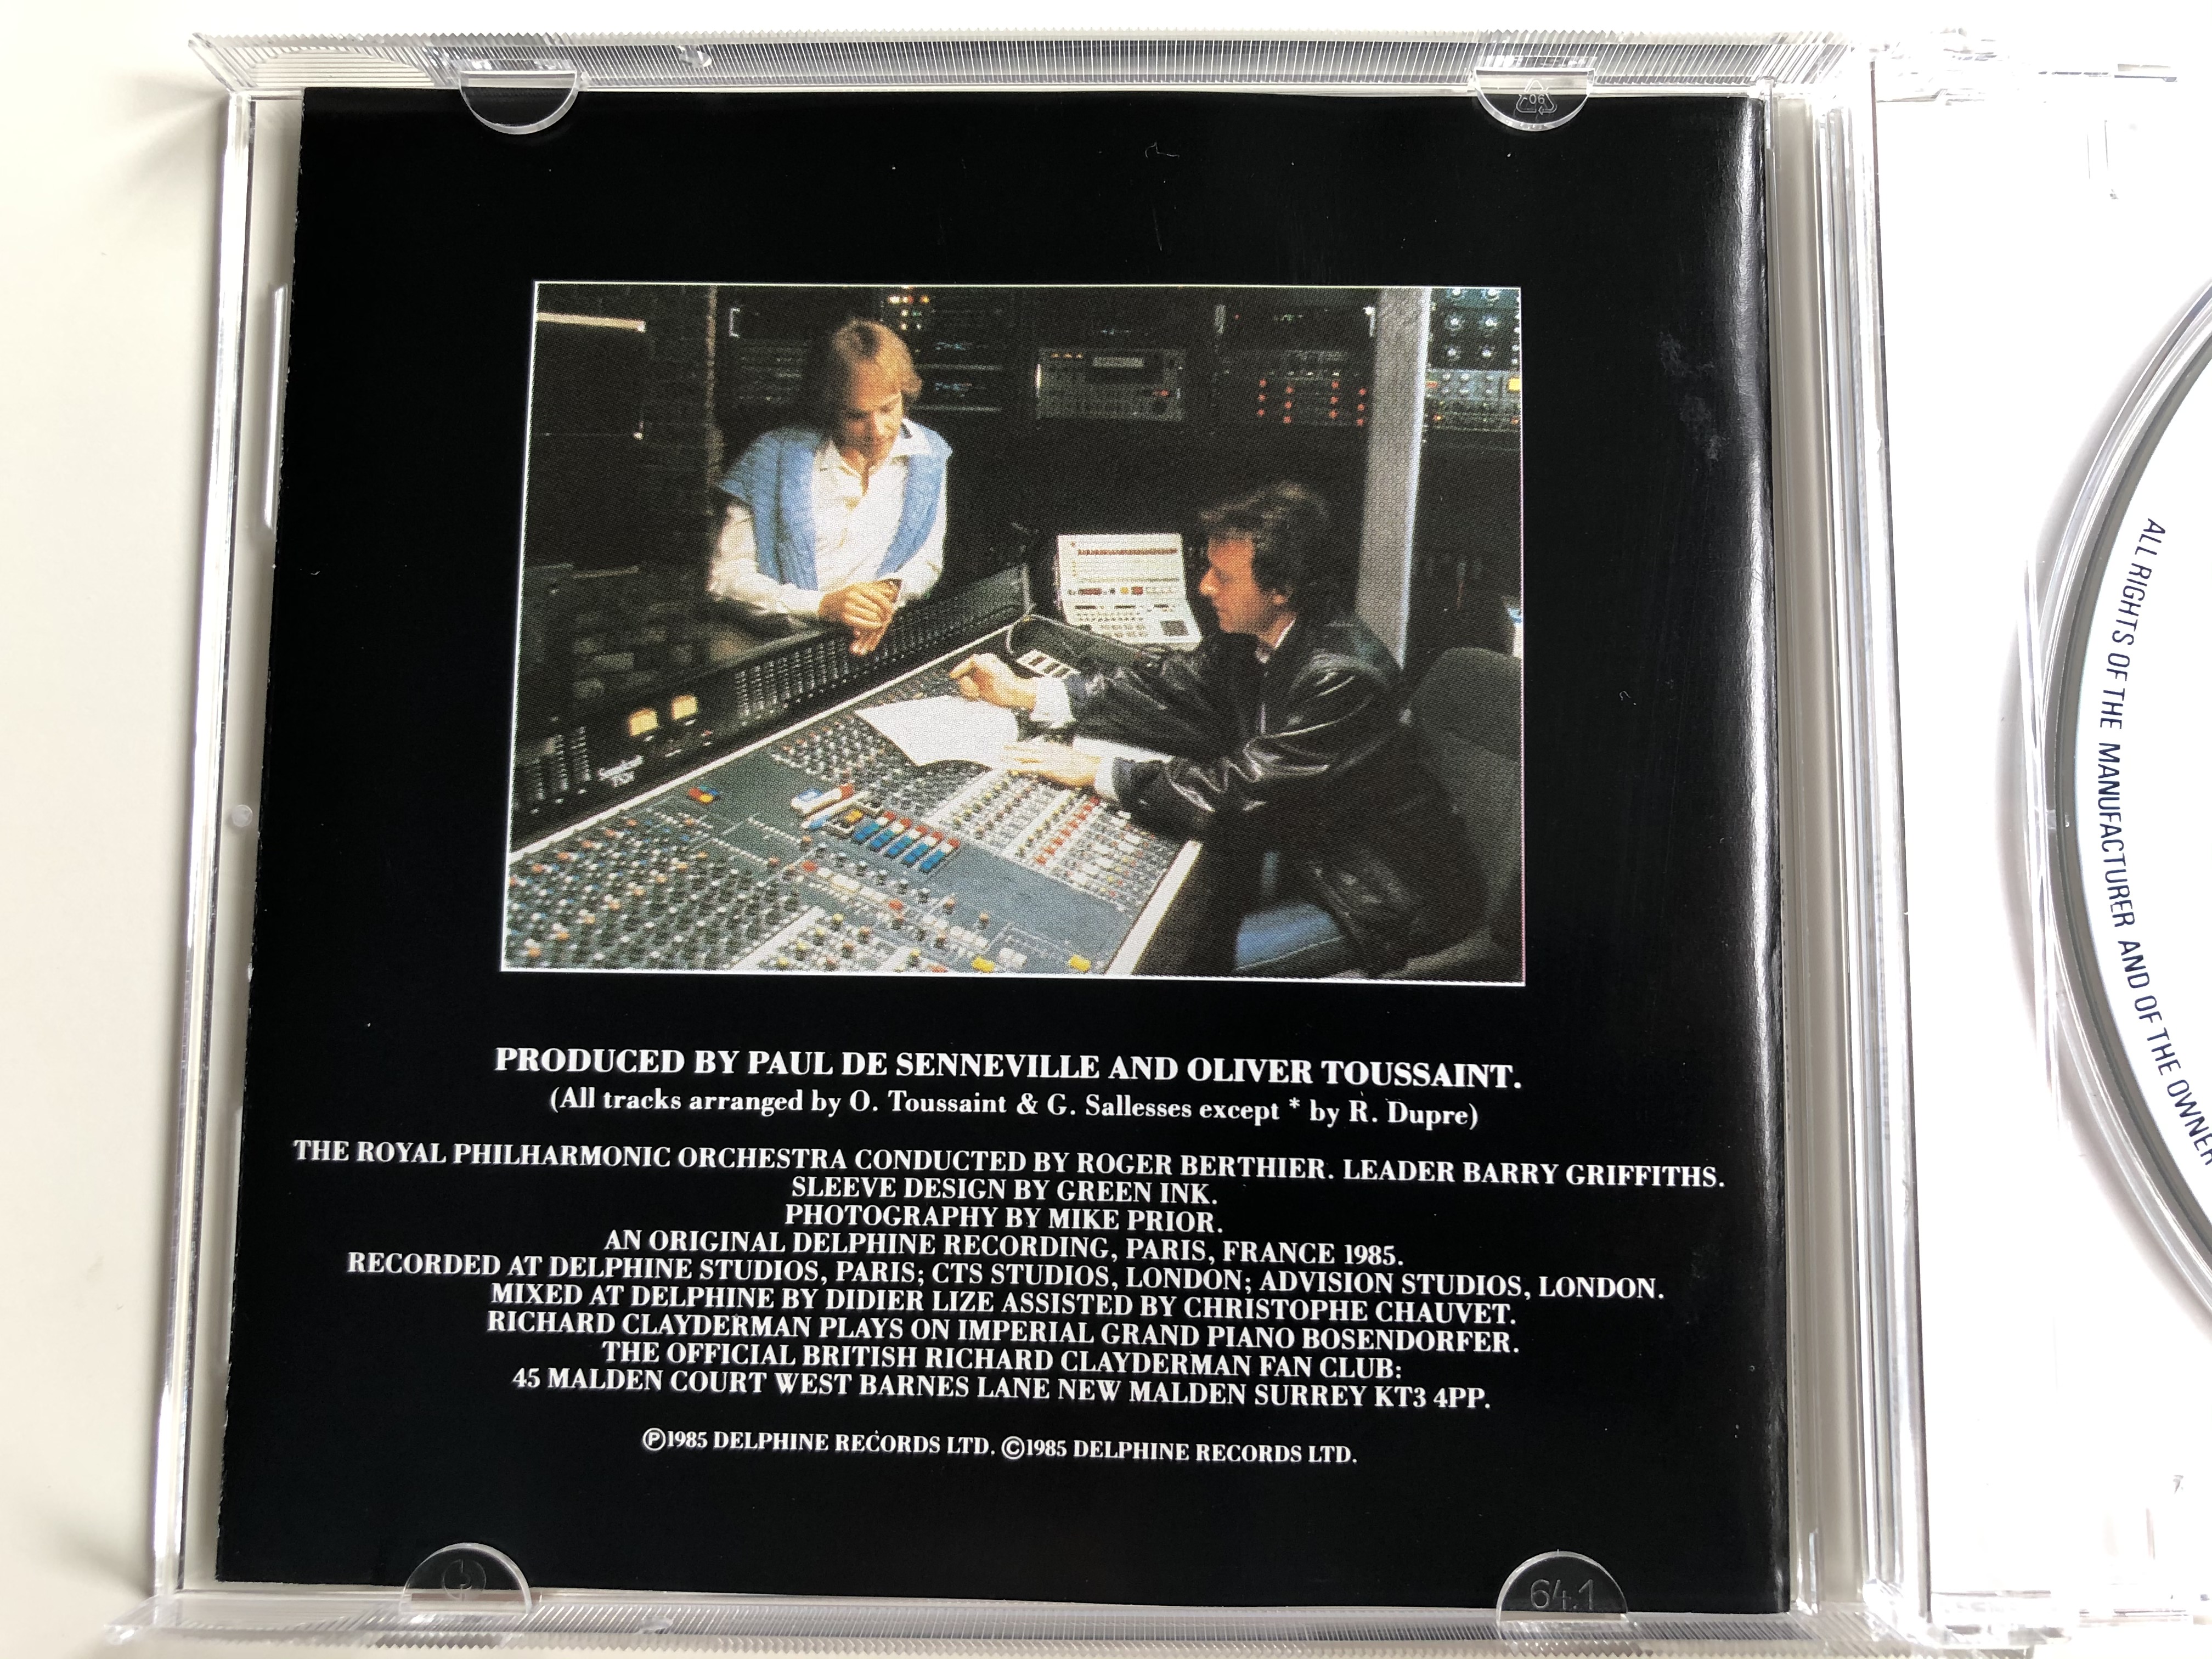 richard-clayderman-the-classic-touch-the-royal-philharmonic-orchestra-delphine-records-audio-cd-1985-stereo-820-299-2-5-.jpg